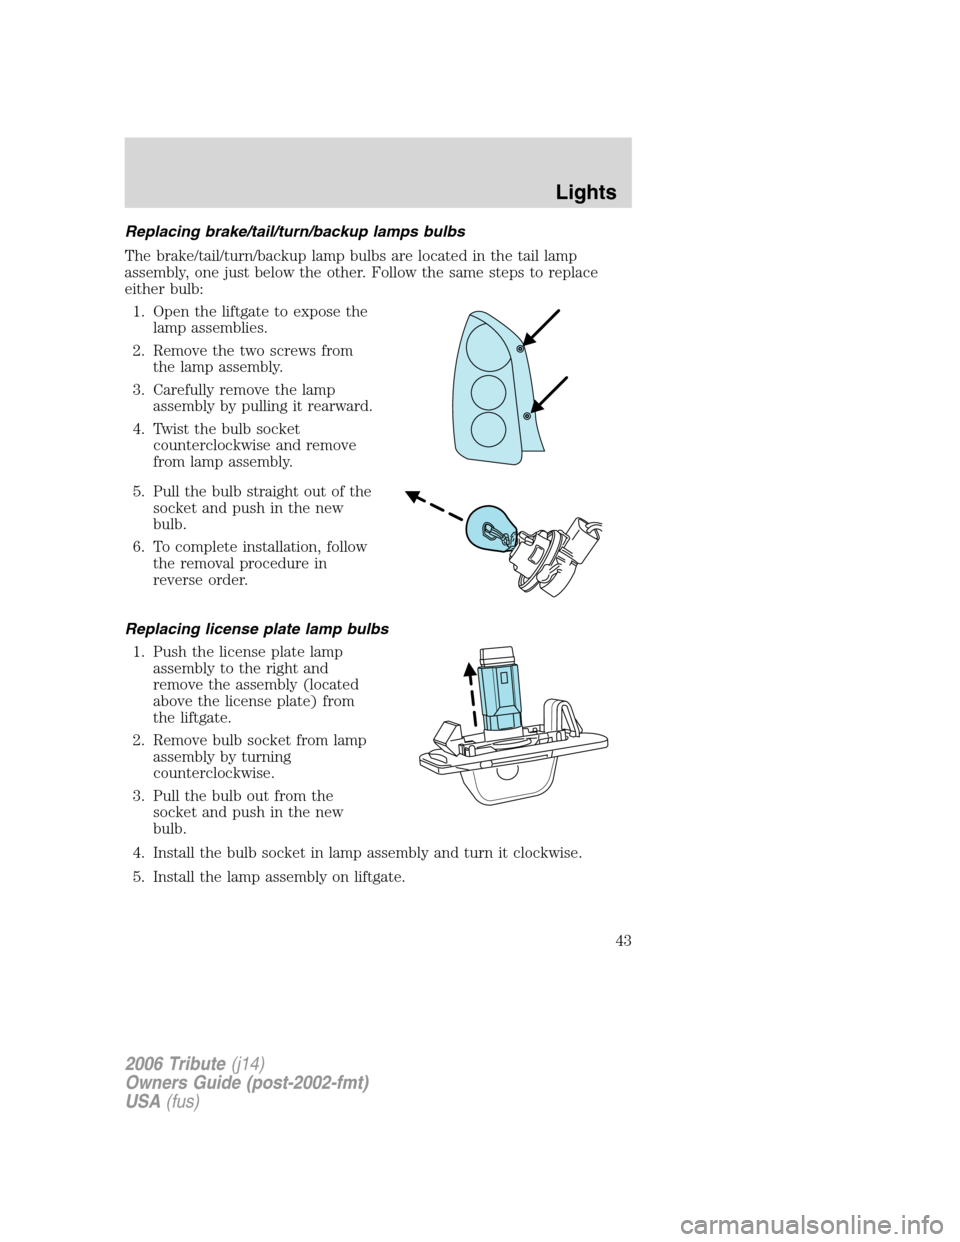 MAZDA MODEL TRIBUTE 2006  Owners Manual (in English) Replacing brake/tail/turn/backup lamps bulbs
The brake/tail/turn/backup lamp bulbs are located in the tail lamp
assembly, one just below the other. Follow the same steps to replace
either bulb:
1. Ope